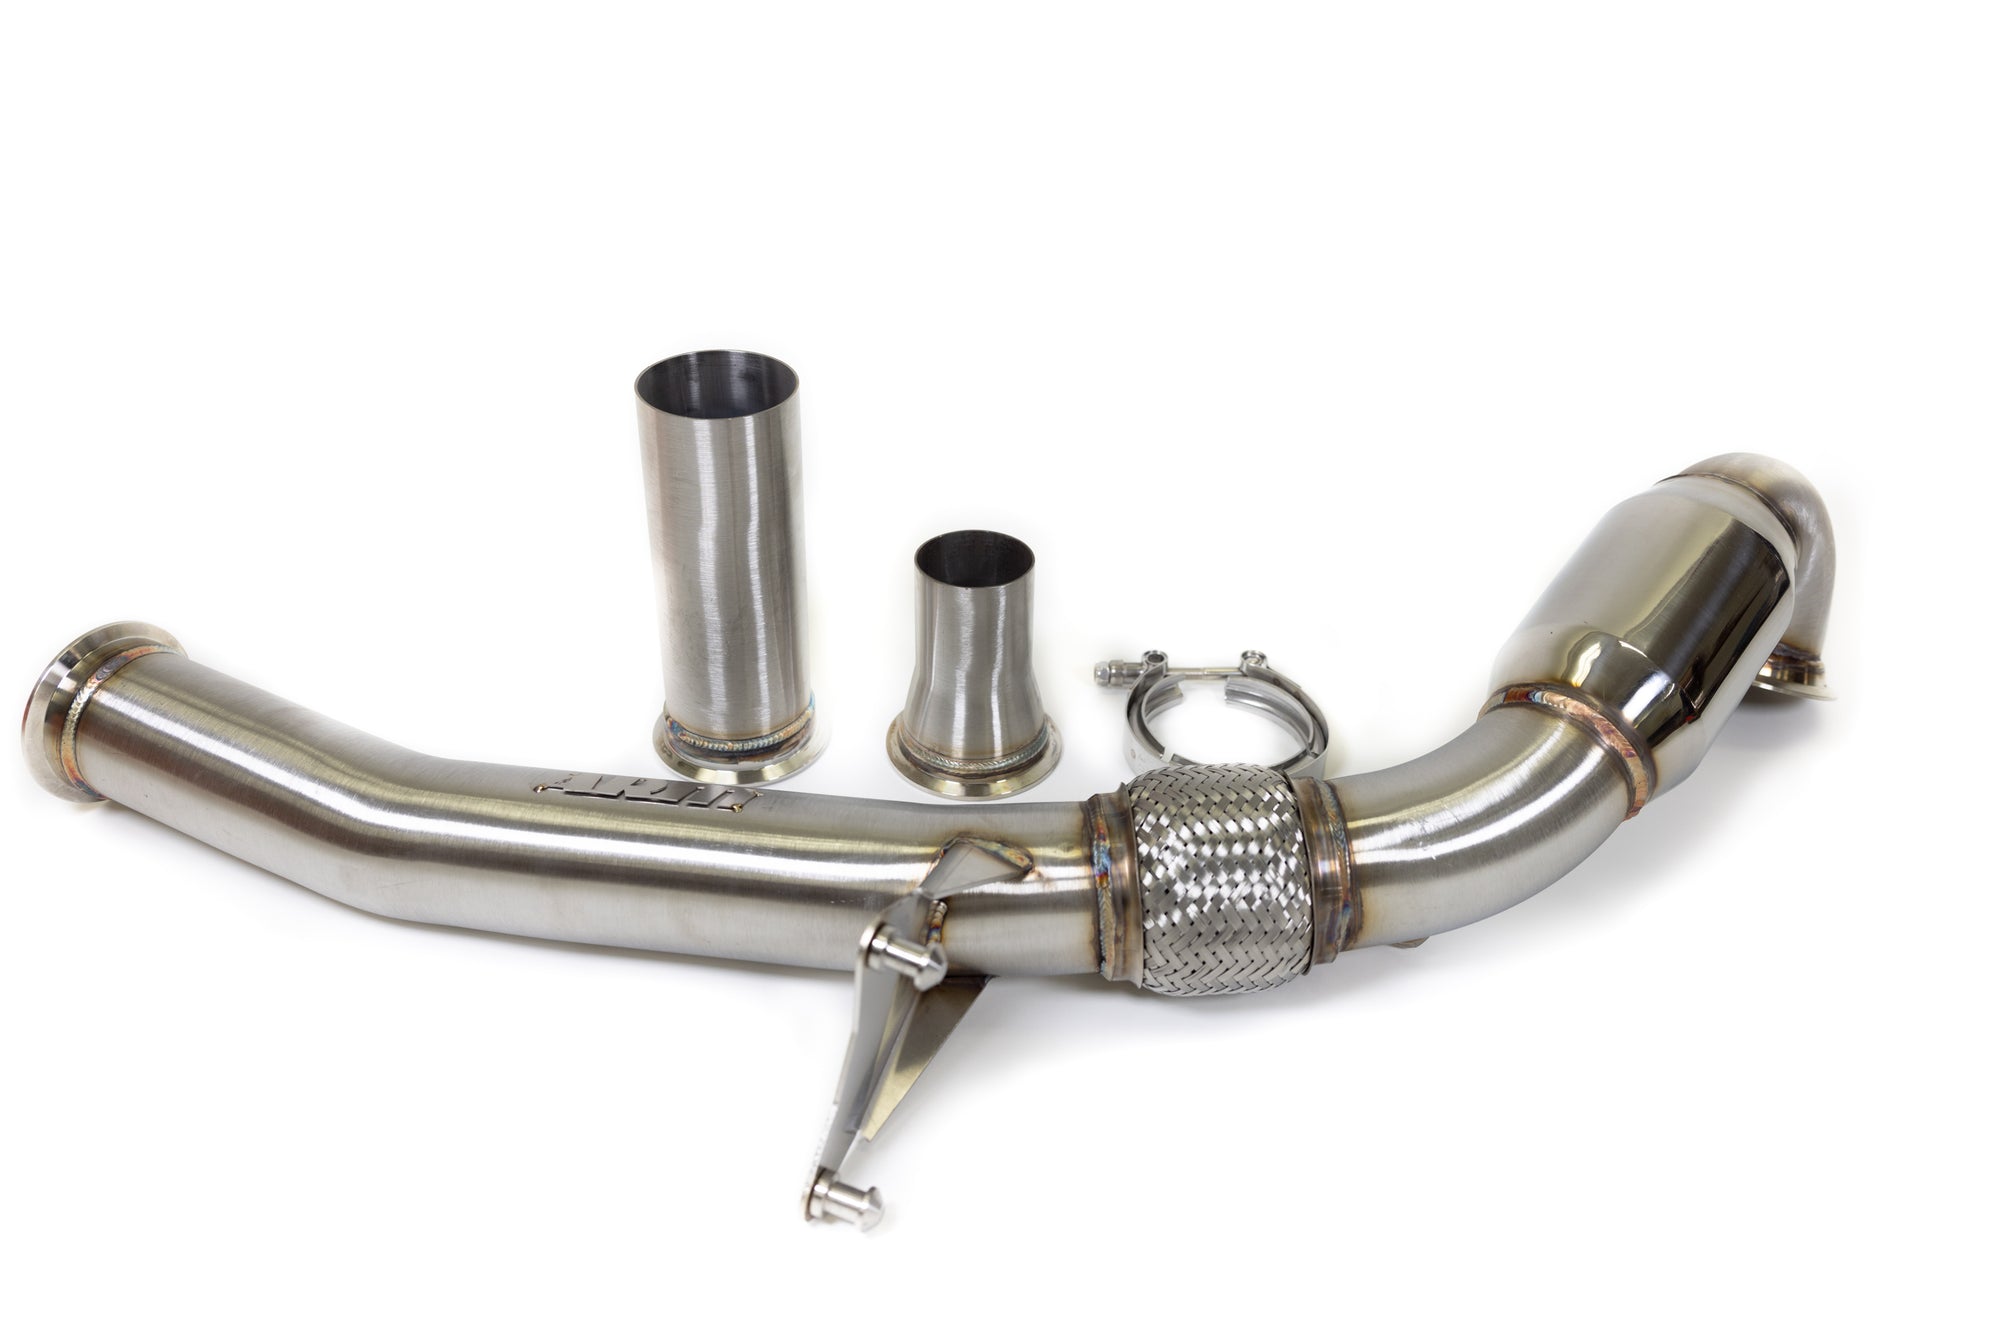 MK7 GOLF 1.8T CATTED DOWNPIPE